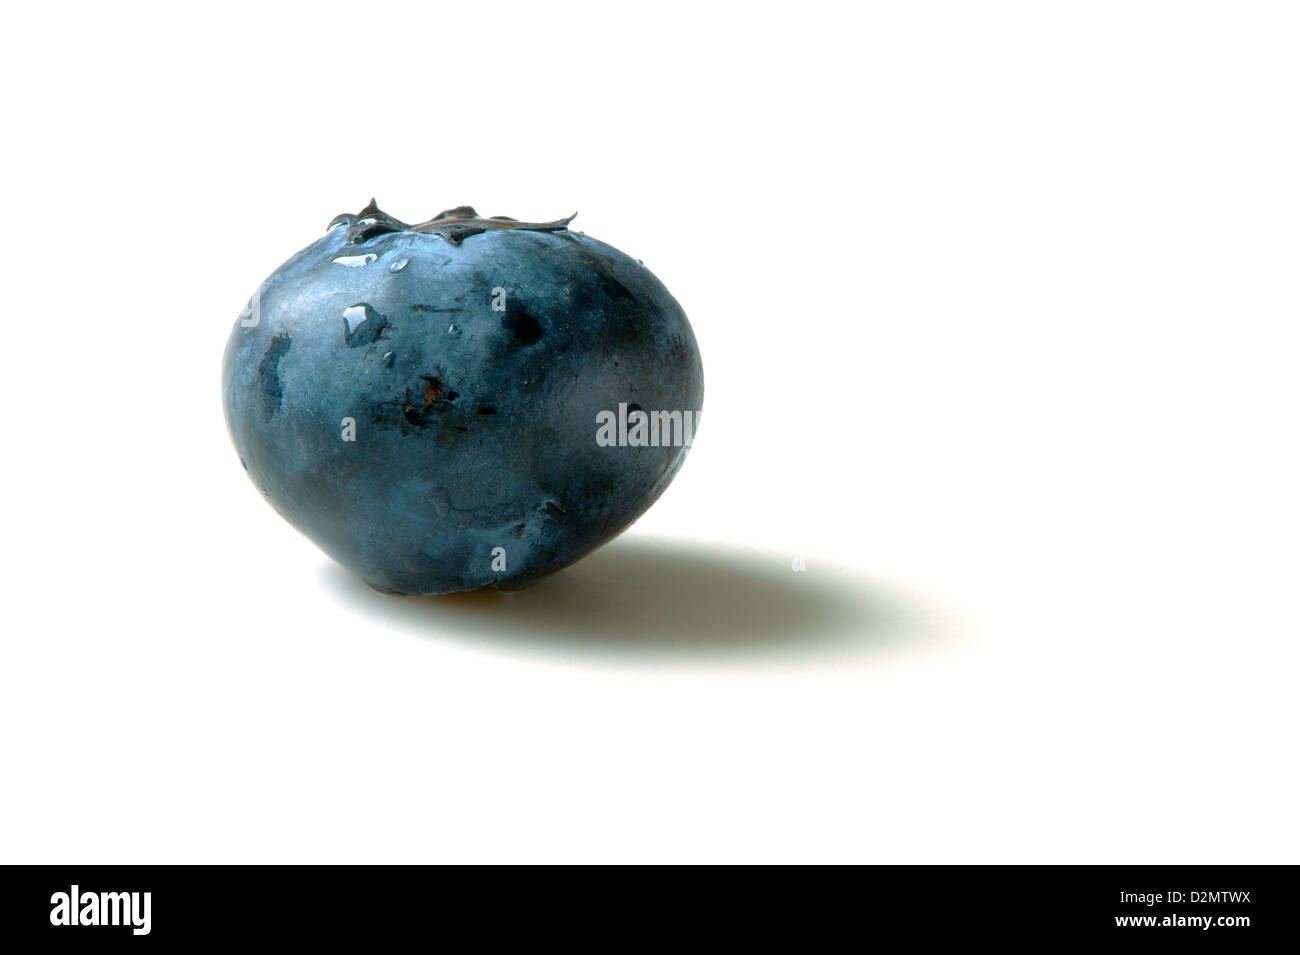 Portrait of a single blueberry against a white background. Illustrates a healthy diet Stock Photo